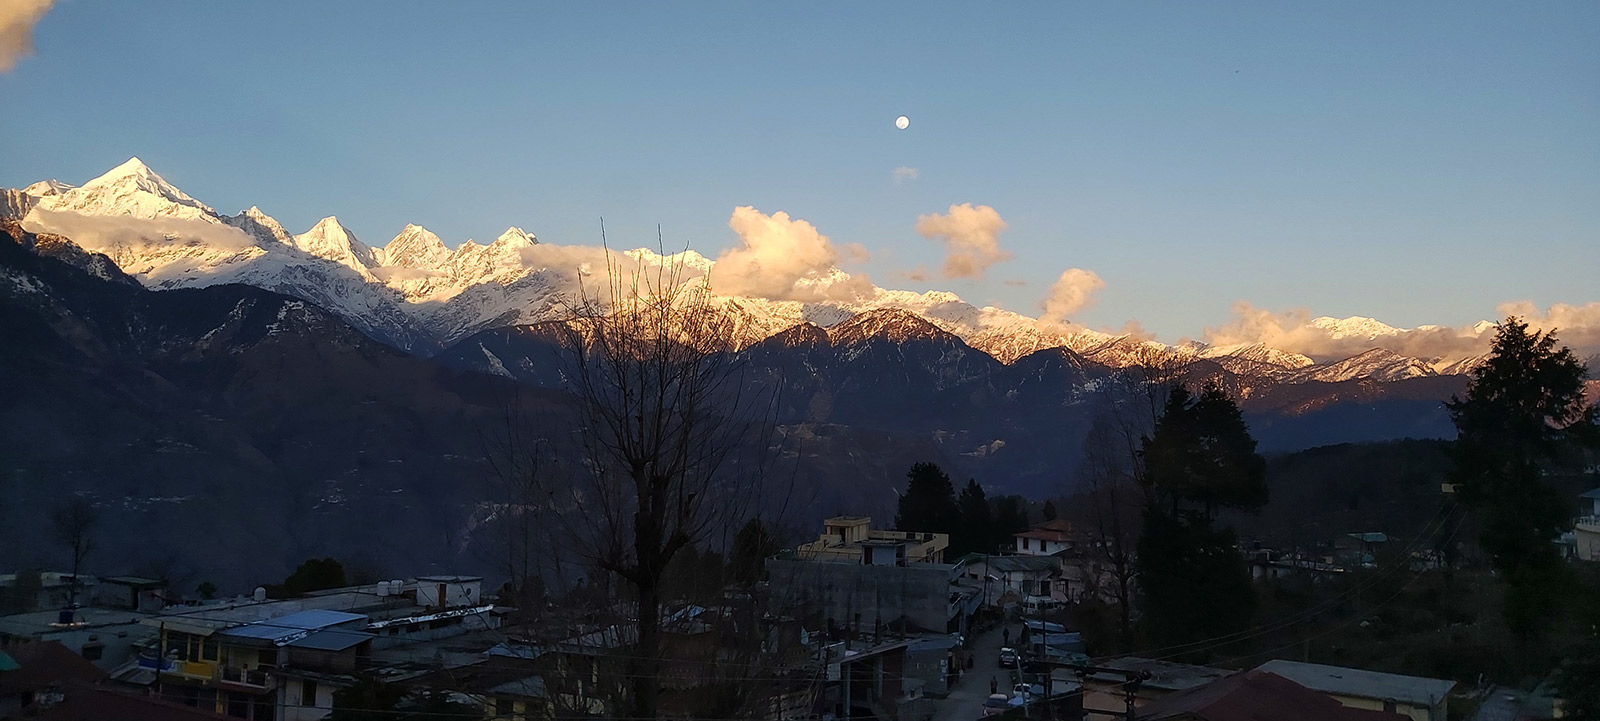 Evening view of Panchachuli Peaks